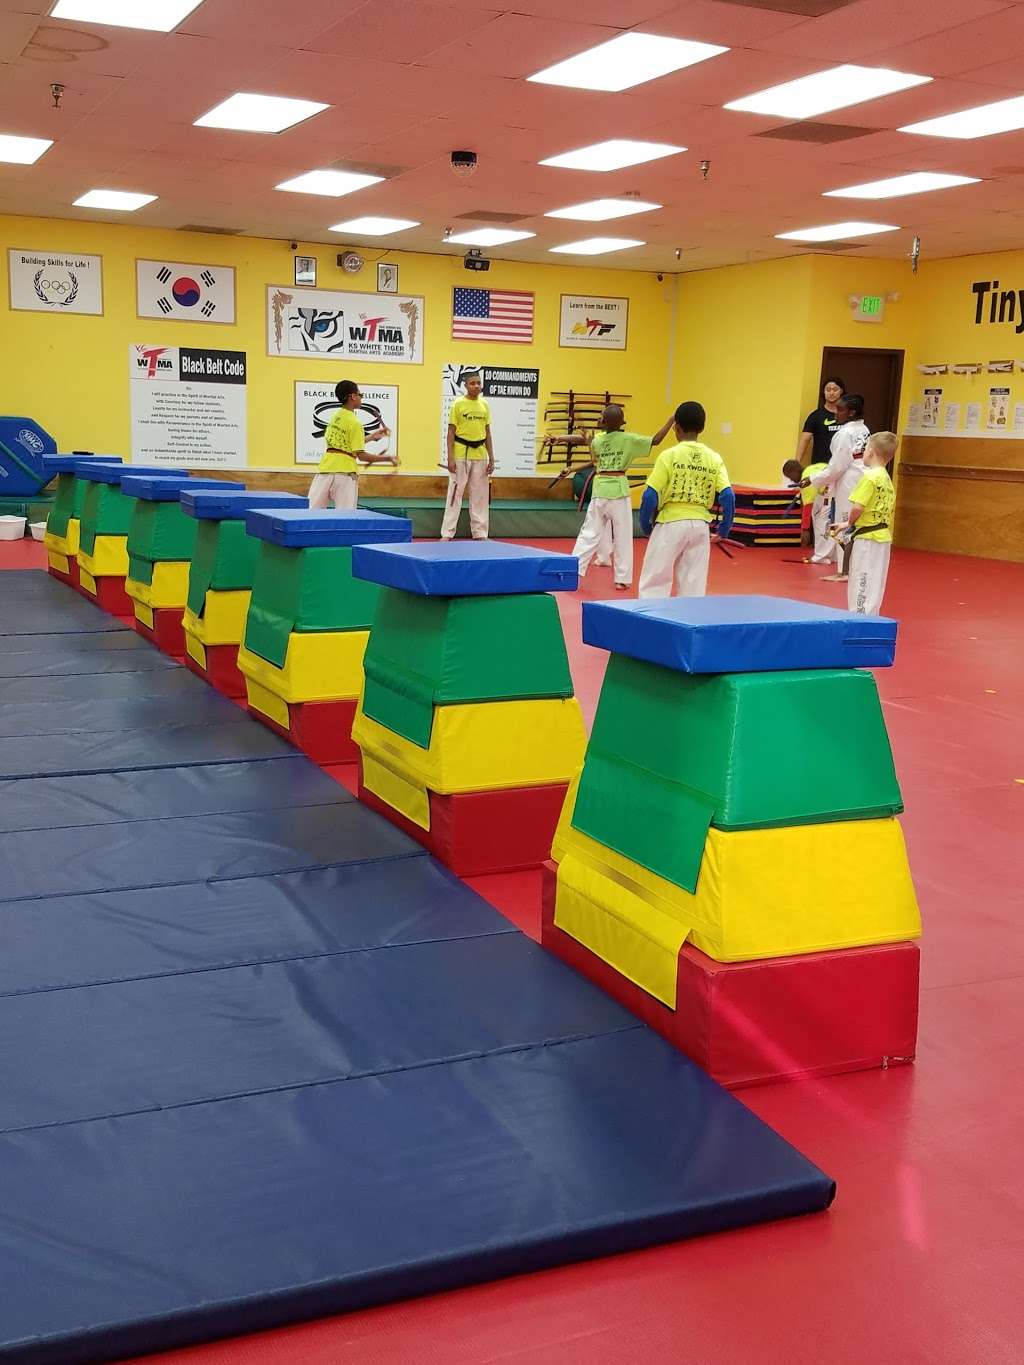 Ks White Tiger Martial Arts | 9770 Groffs Mill Dr, Owings Mills, MD 21117 | Phone: (410) 363-1800